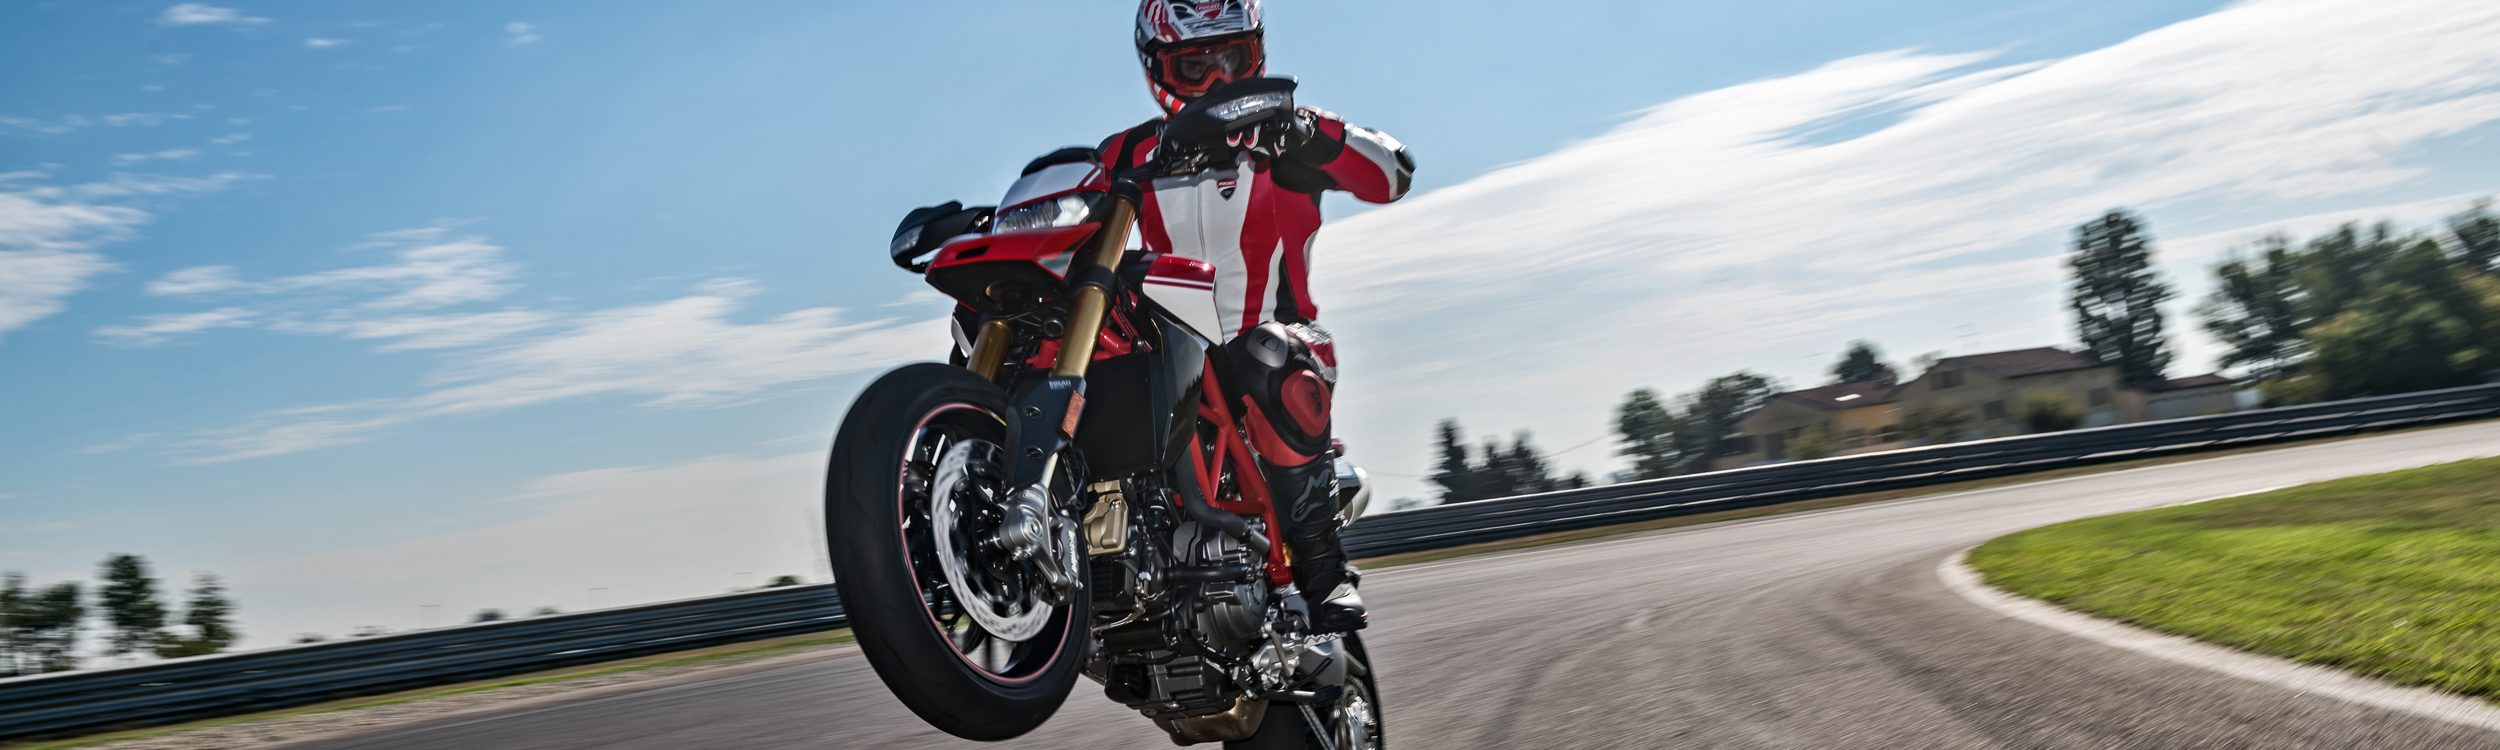 Motorcycle rider on a Ducati motorcycle doing a wheelie on a track.